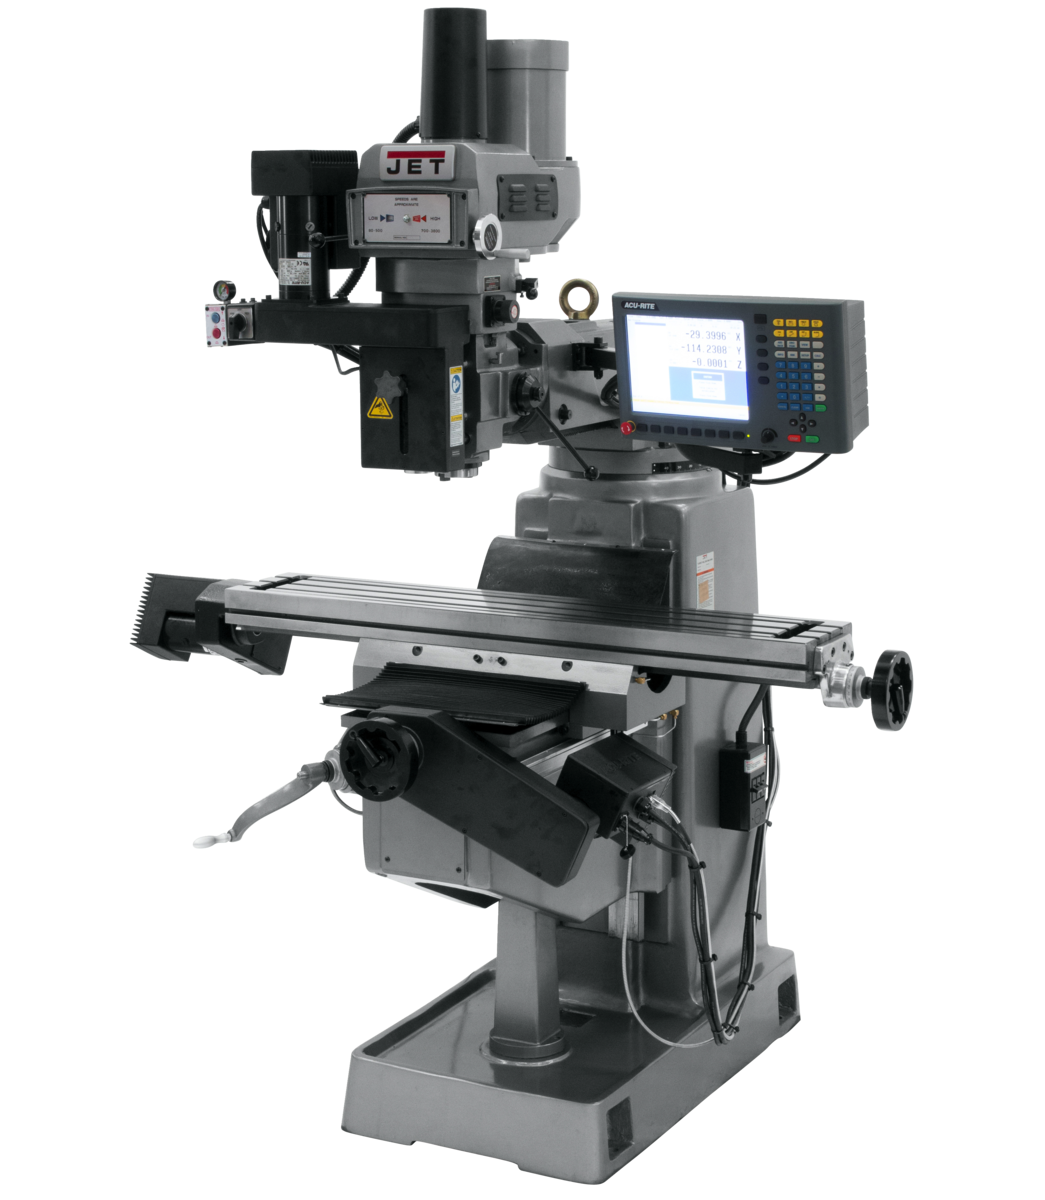 JTM-4VS Mill With 3-Axis ACU-RITE G-2 MILLPWR CNC With Air Powered Draw Bar